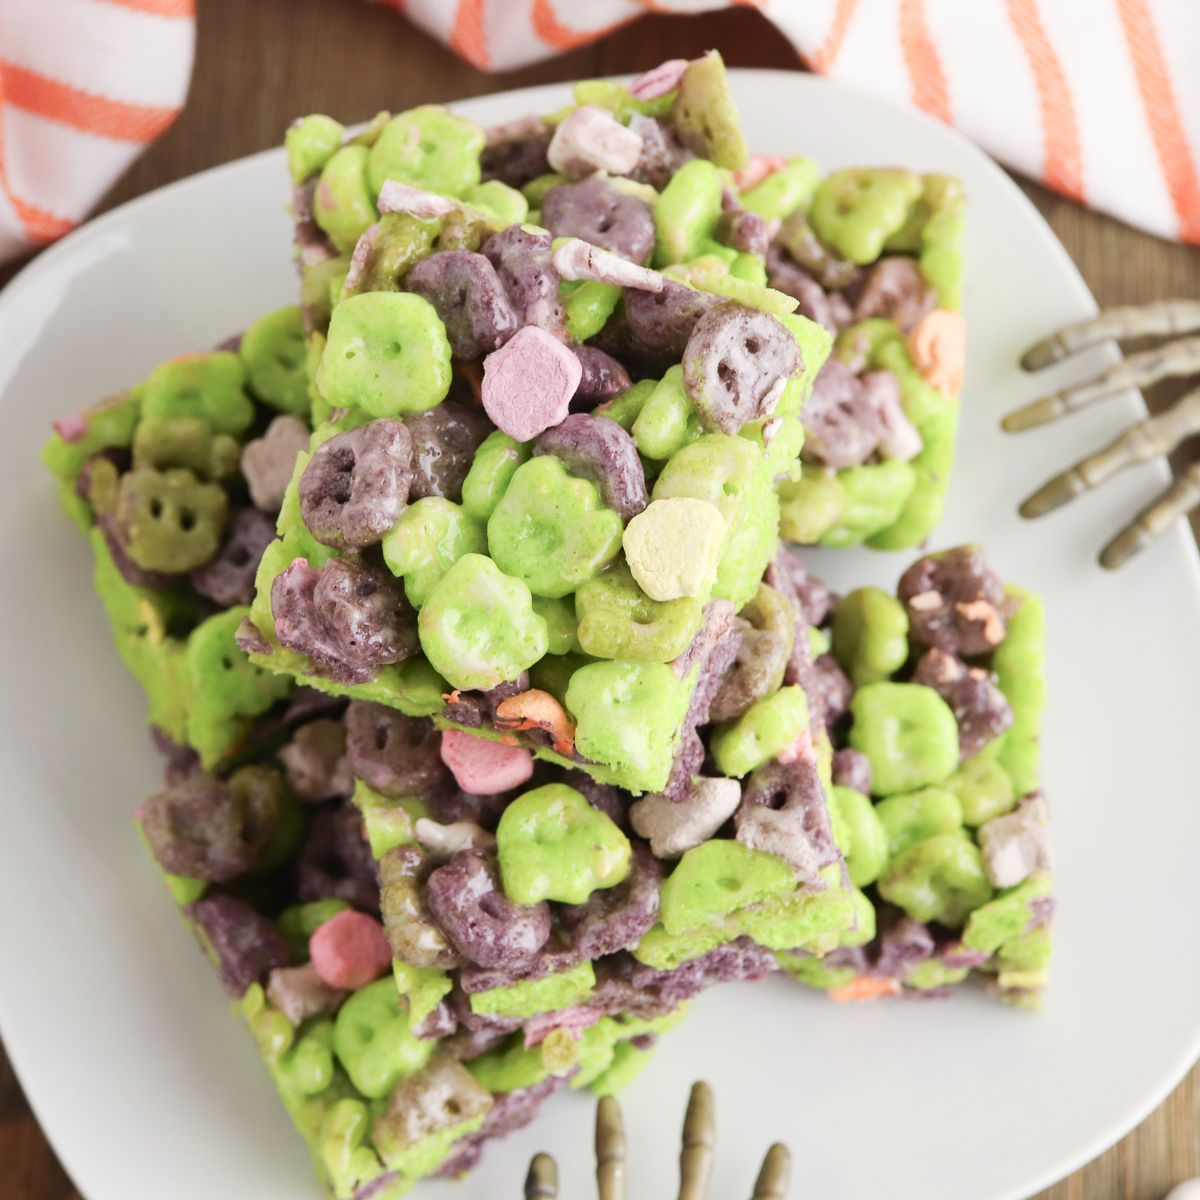 A plate of green and purple cereal bars on a white plate.